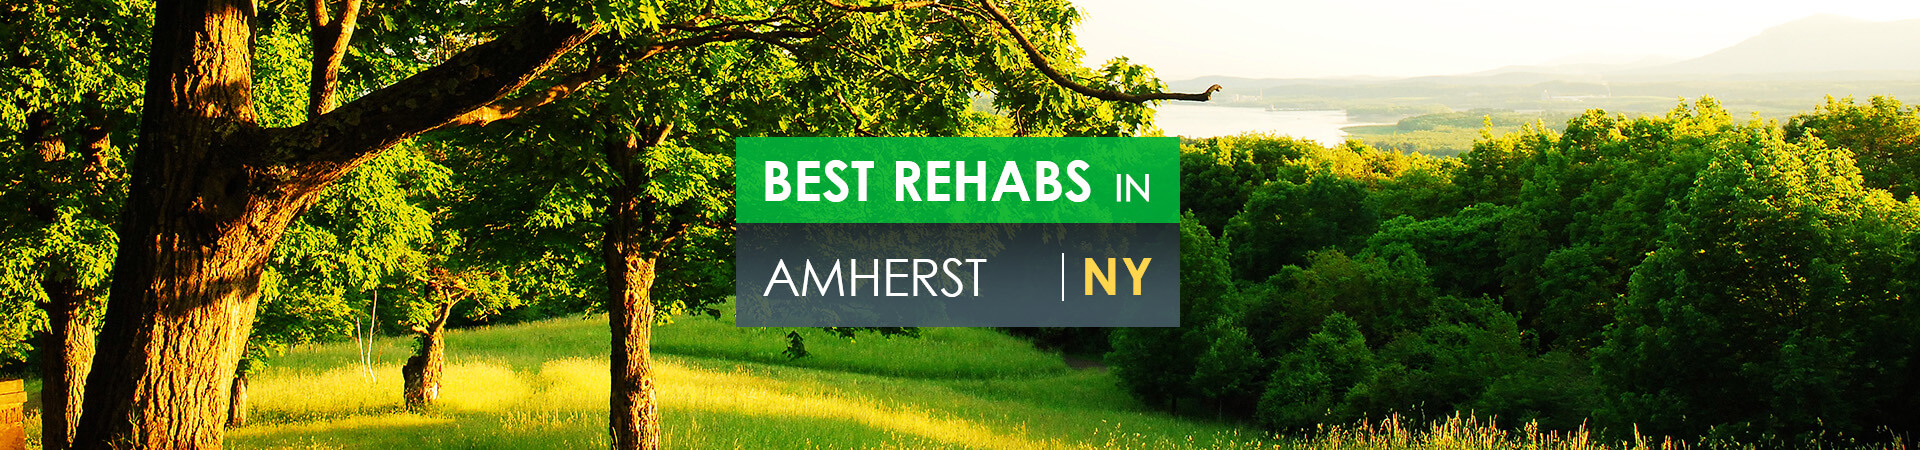 Best rehabs in Amherst, NY